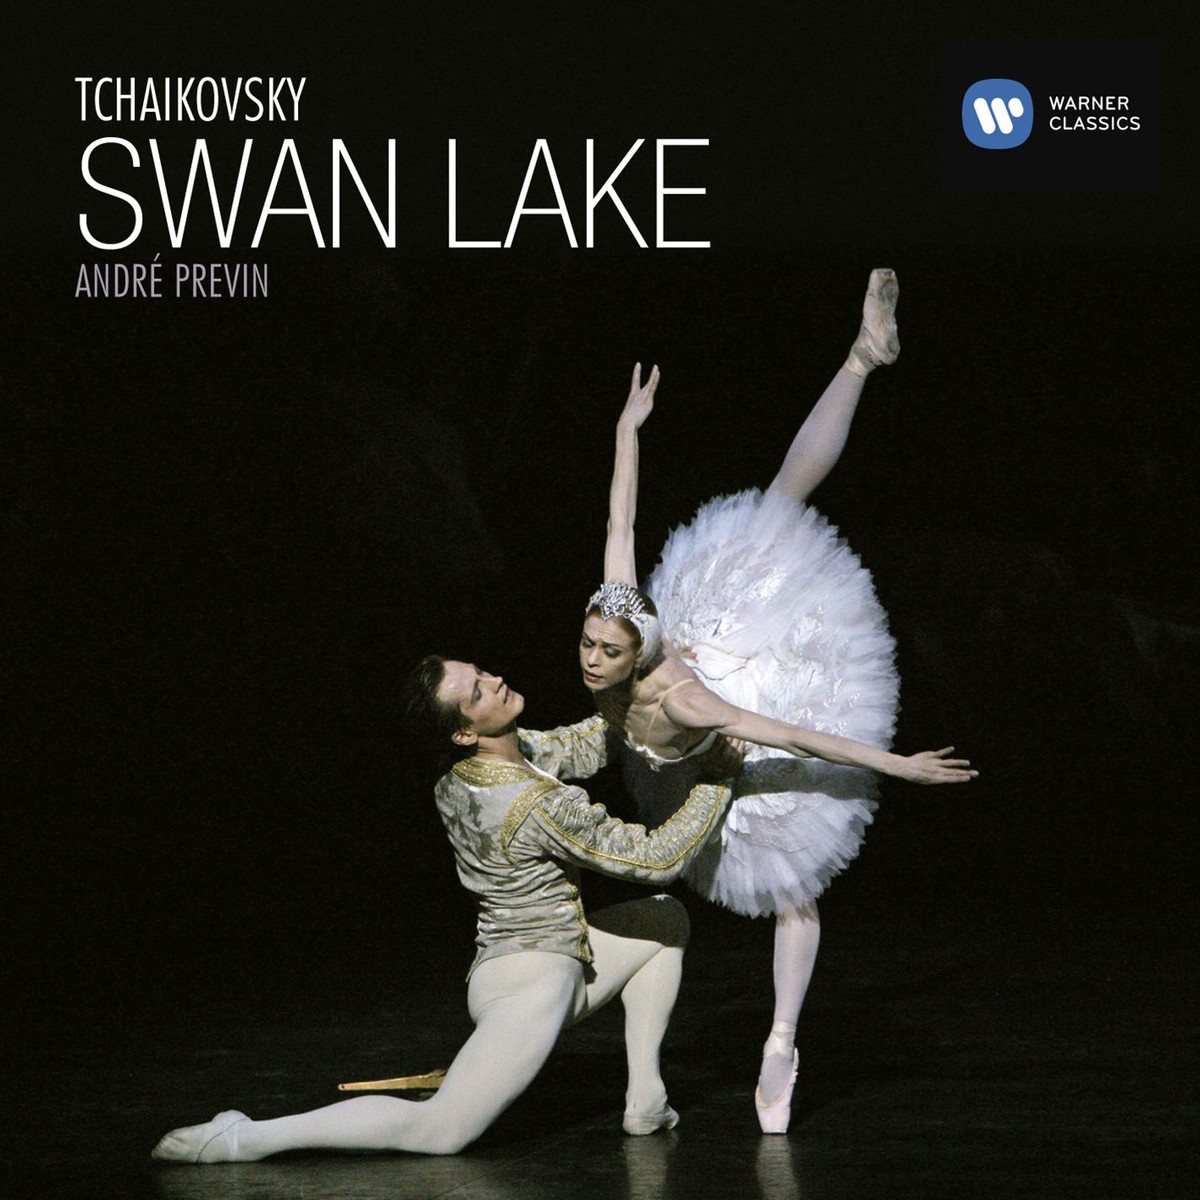 Swan Lake - Ballet in four acts Op. 20, Act III: 16. Dance of the Guests and the Dwarfs (Moderato assai - Allegro vivo)